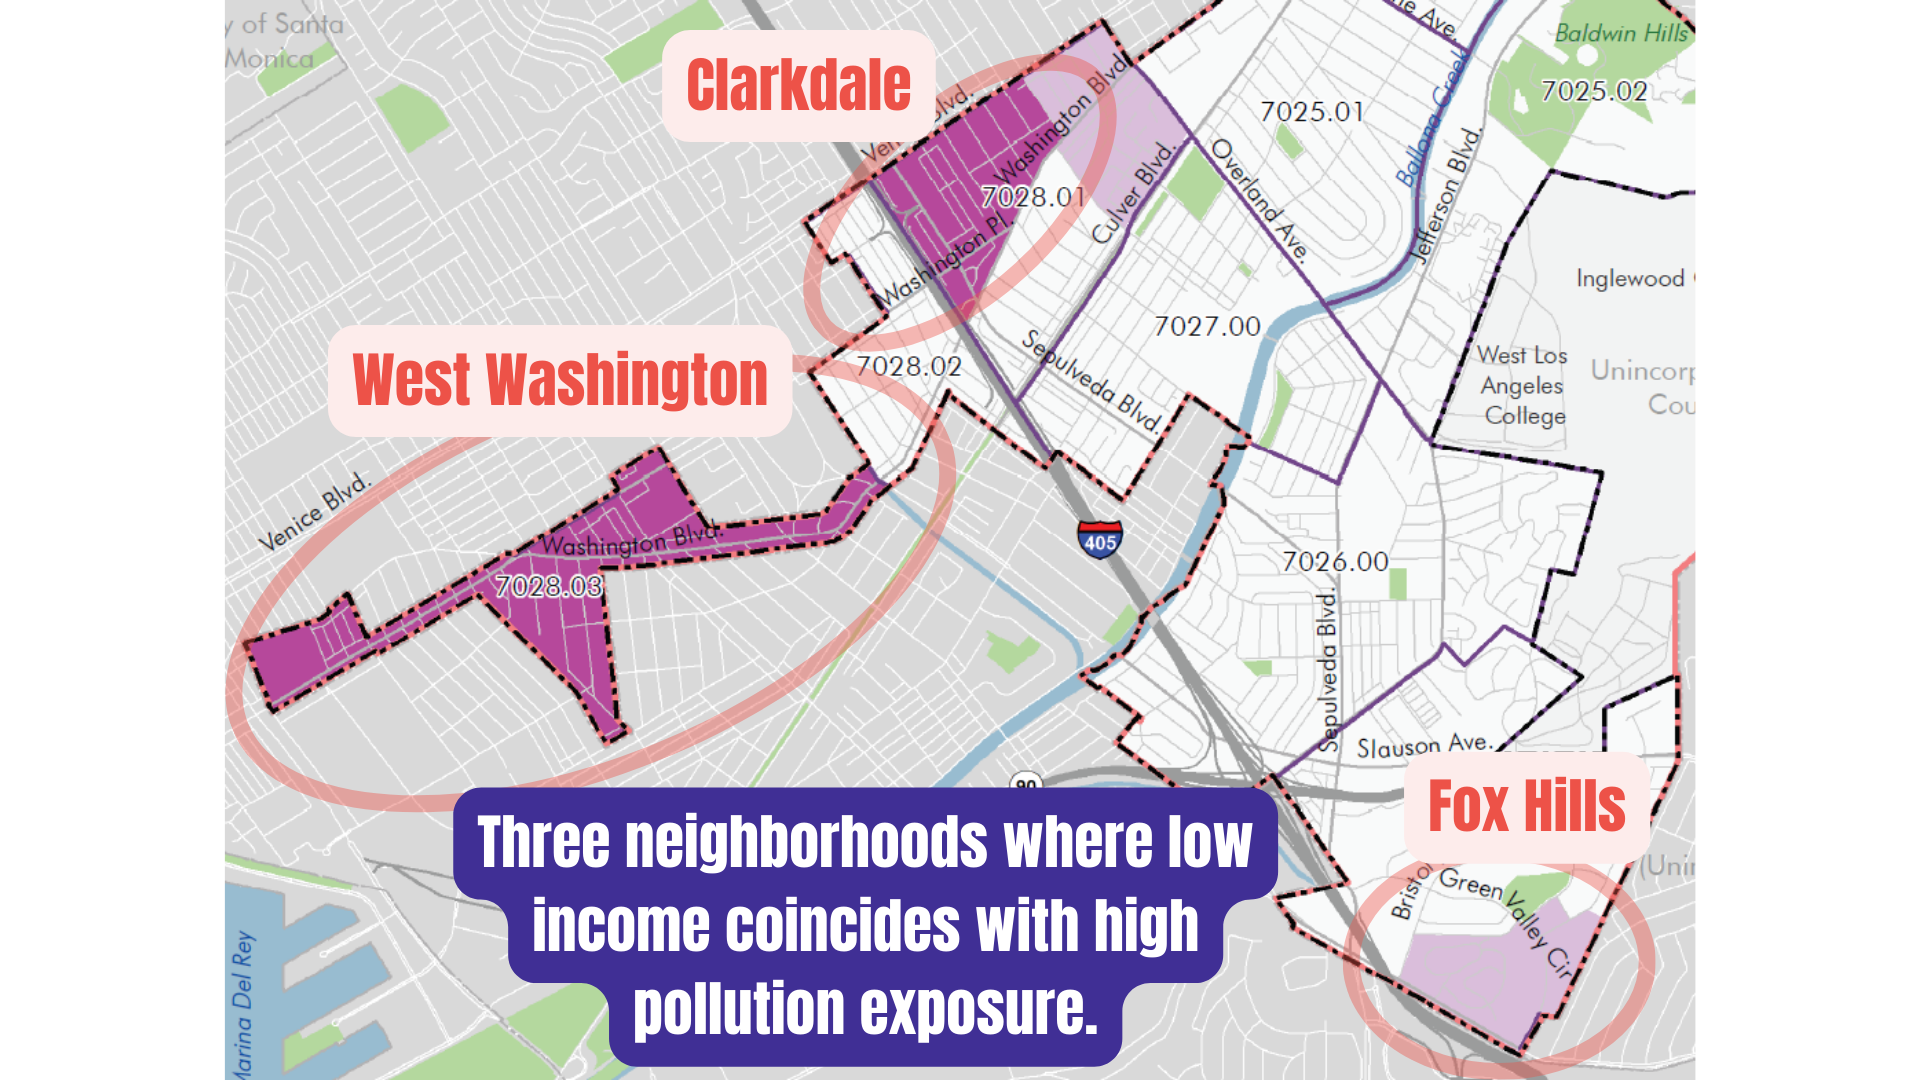  Three neighborhoods where low income coincides with high pollution exposure. 